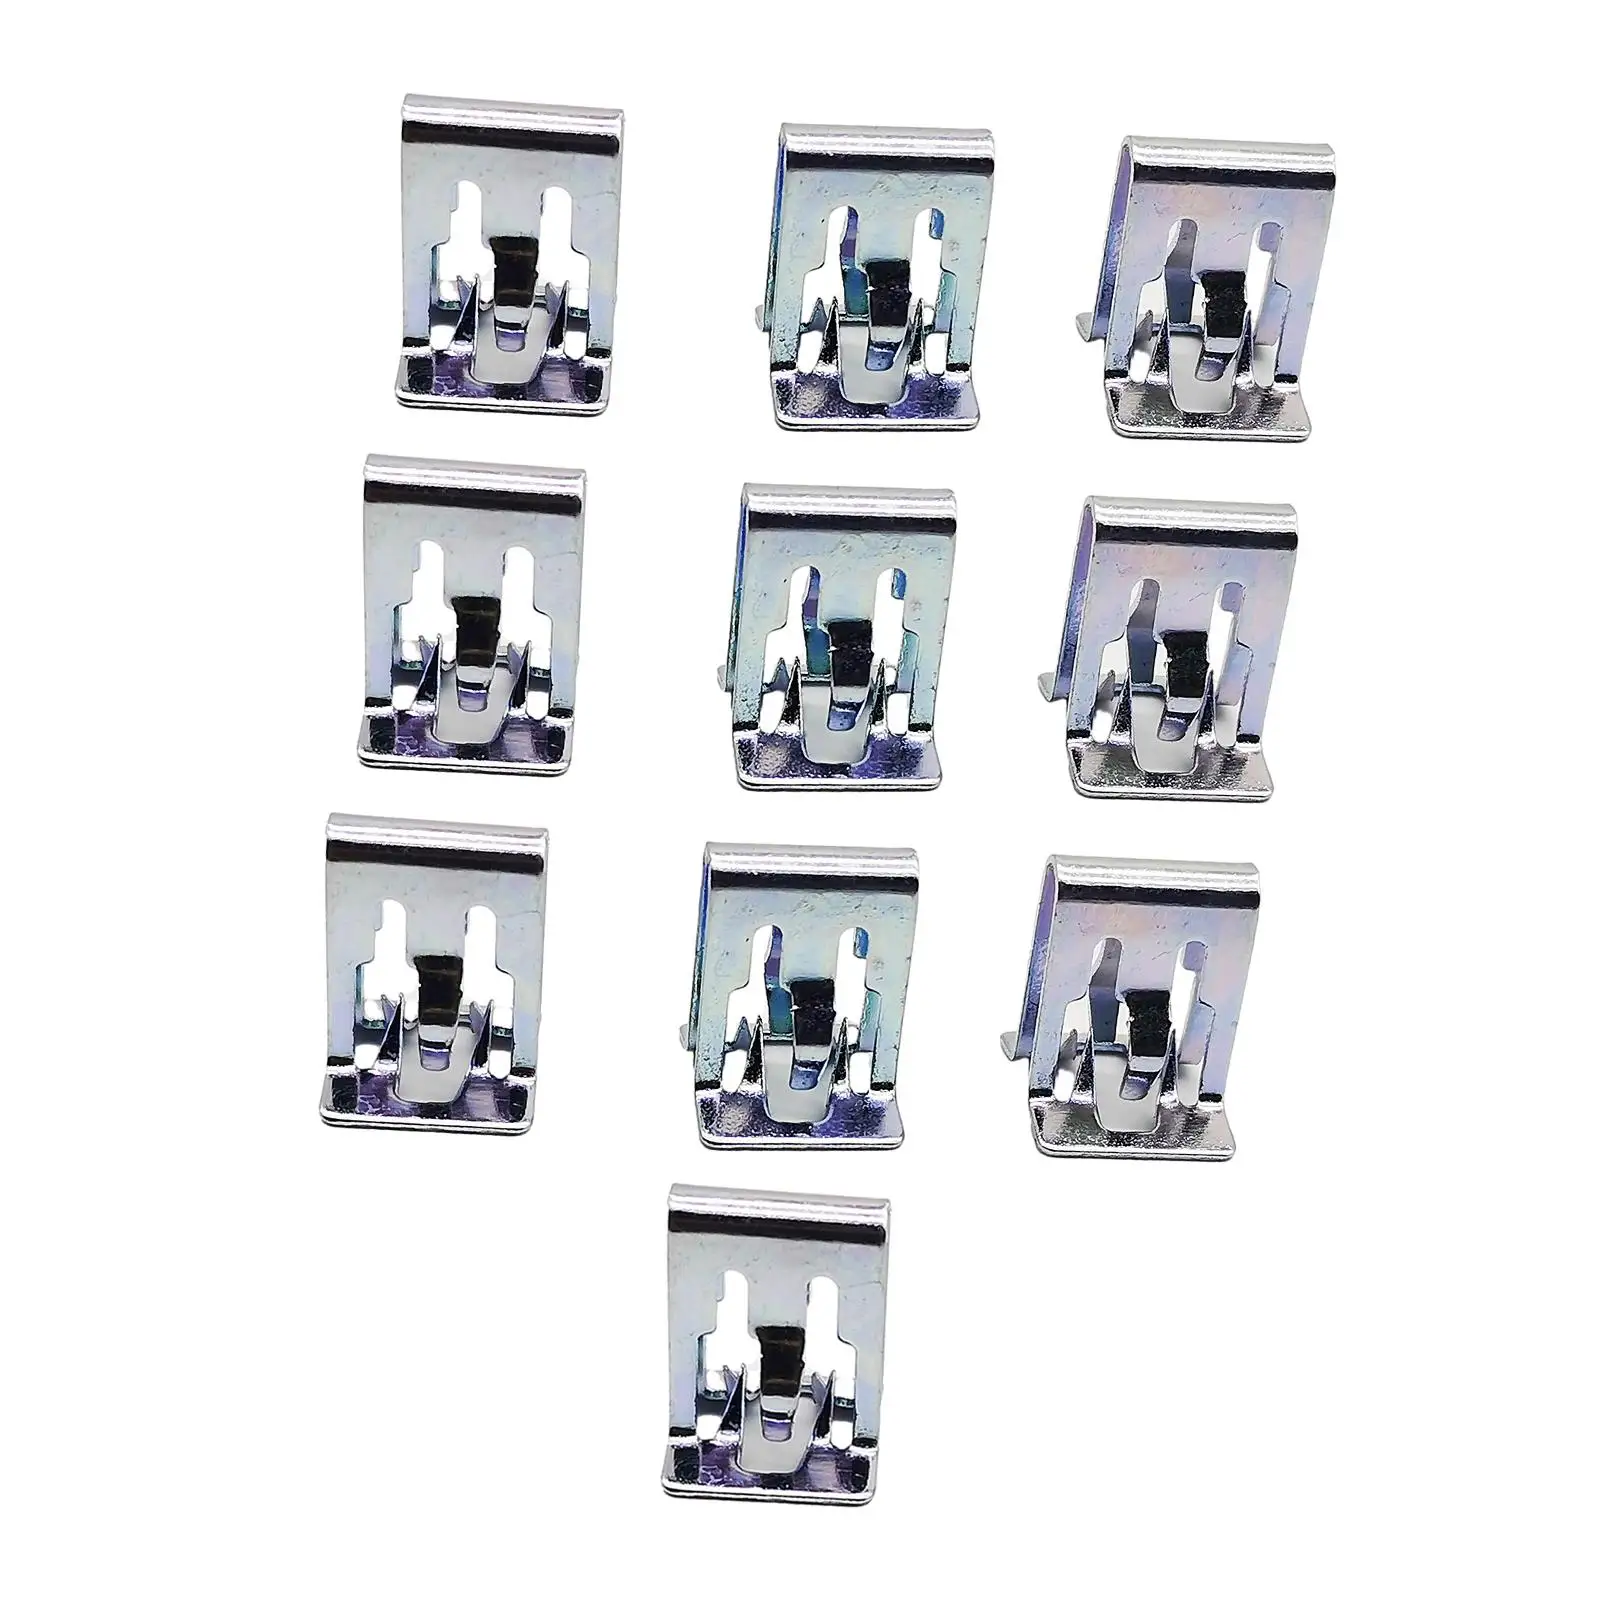 10x Steel Car Retainer Clips Retaining Clips High Performance Left Right Fixed Clip Buckle for Trucks Vehicle Car Dashboard